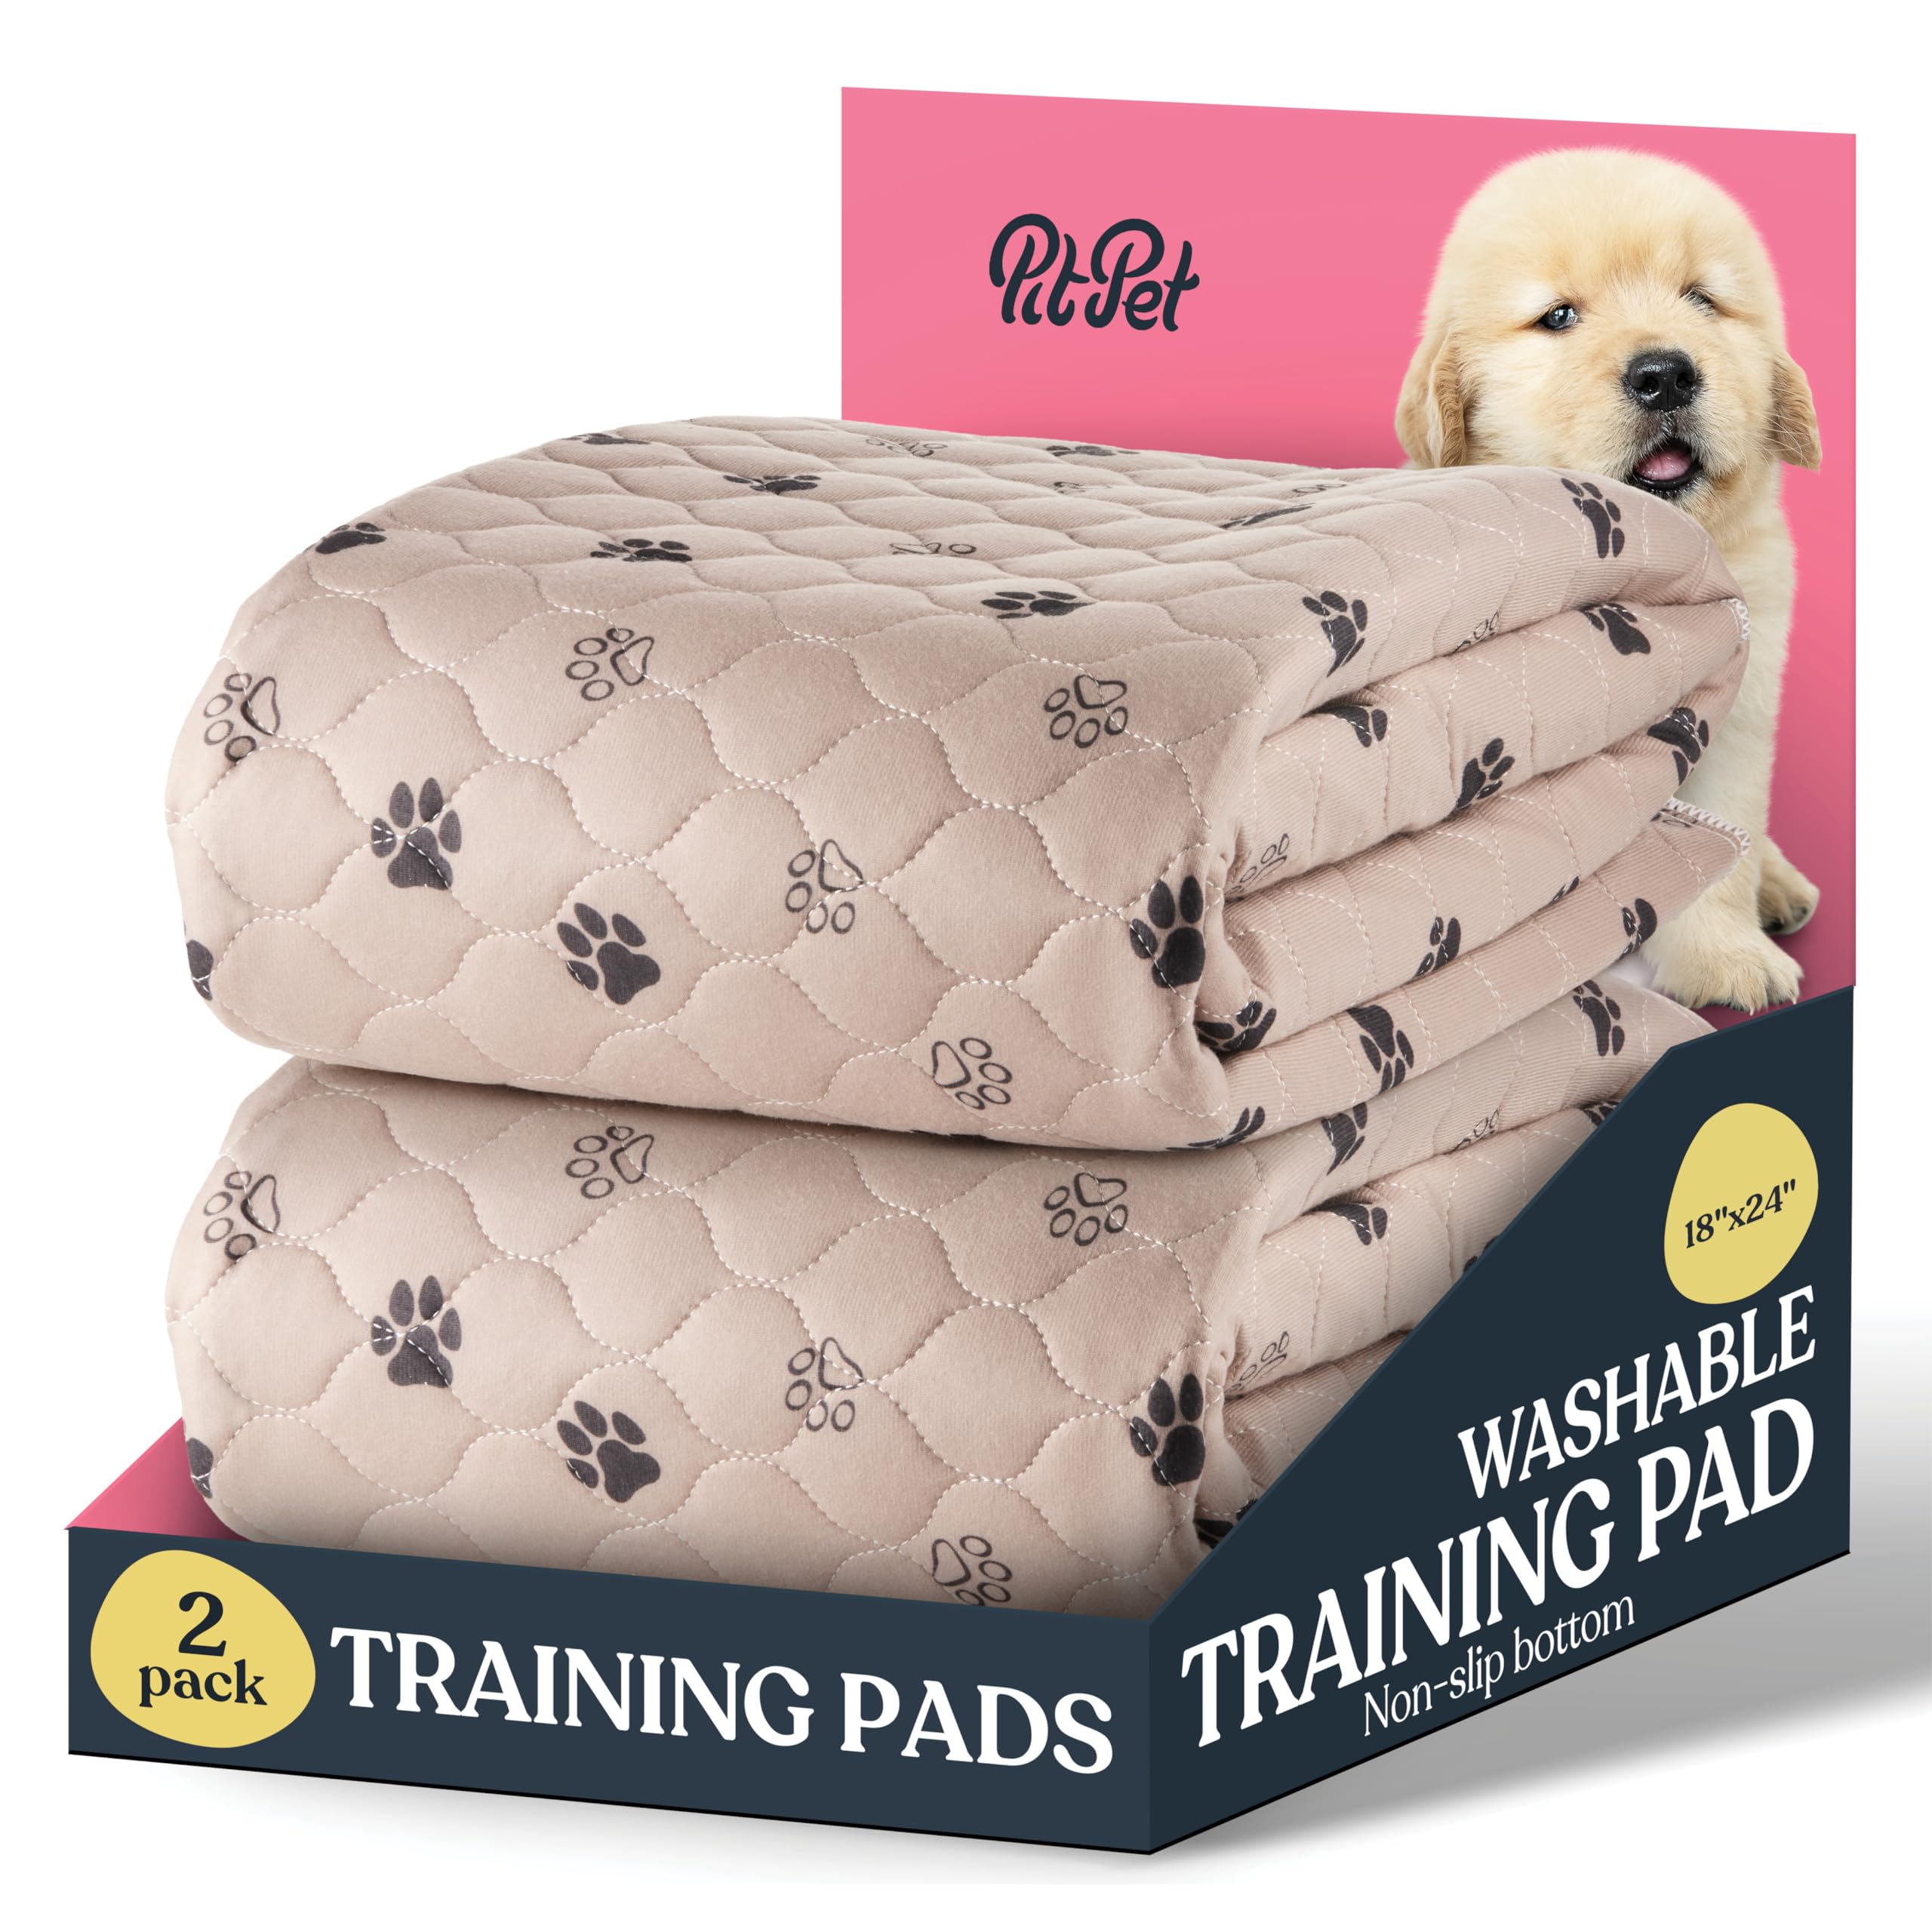 Super Absorbent Washable Pee Pads for Dogs - 2-Pack Superior Reusable Puppy Pads Pet Training Pads –100% Waterproof Dog Pee Pad Protects Against Urine Leakage Non-Slip Grip Prevents Slipping& Bunching  - Very Good